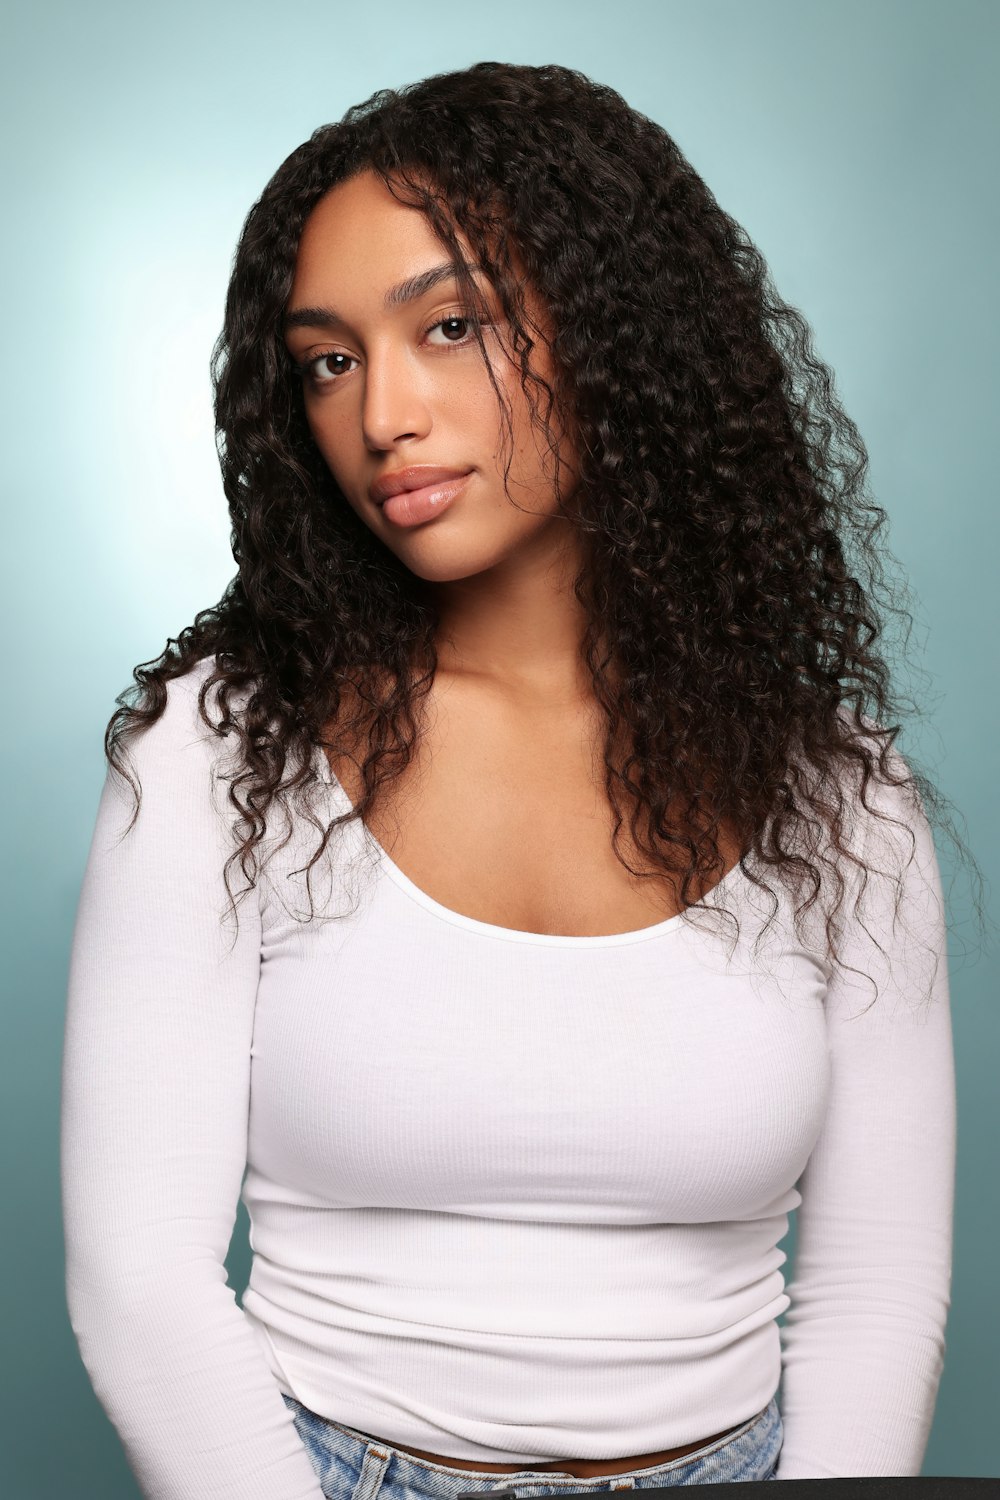 a woman with long curly hair posing for a picture